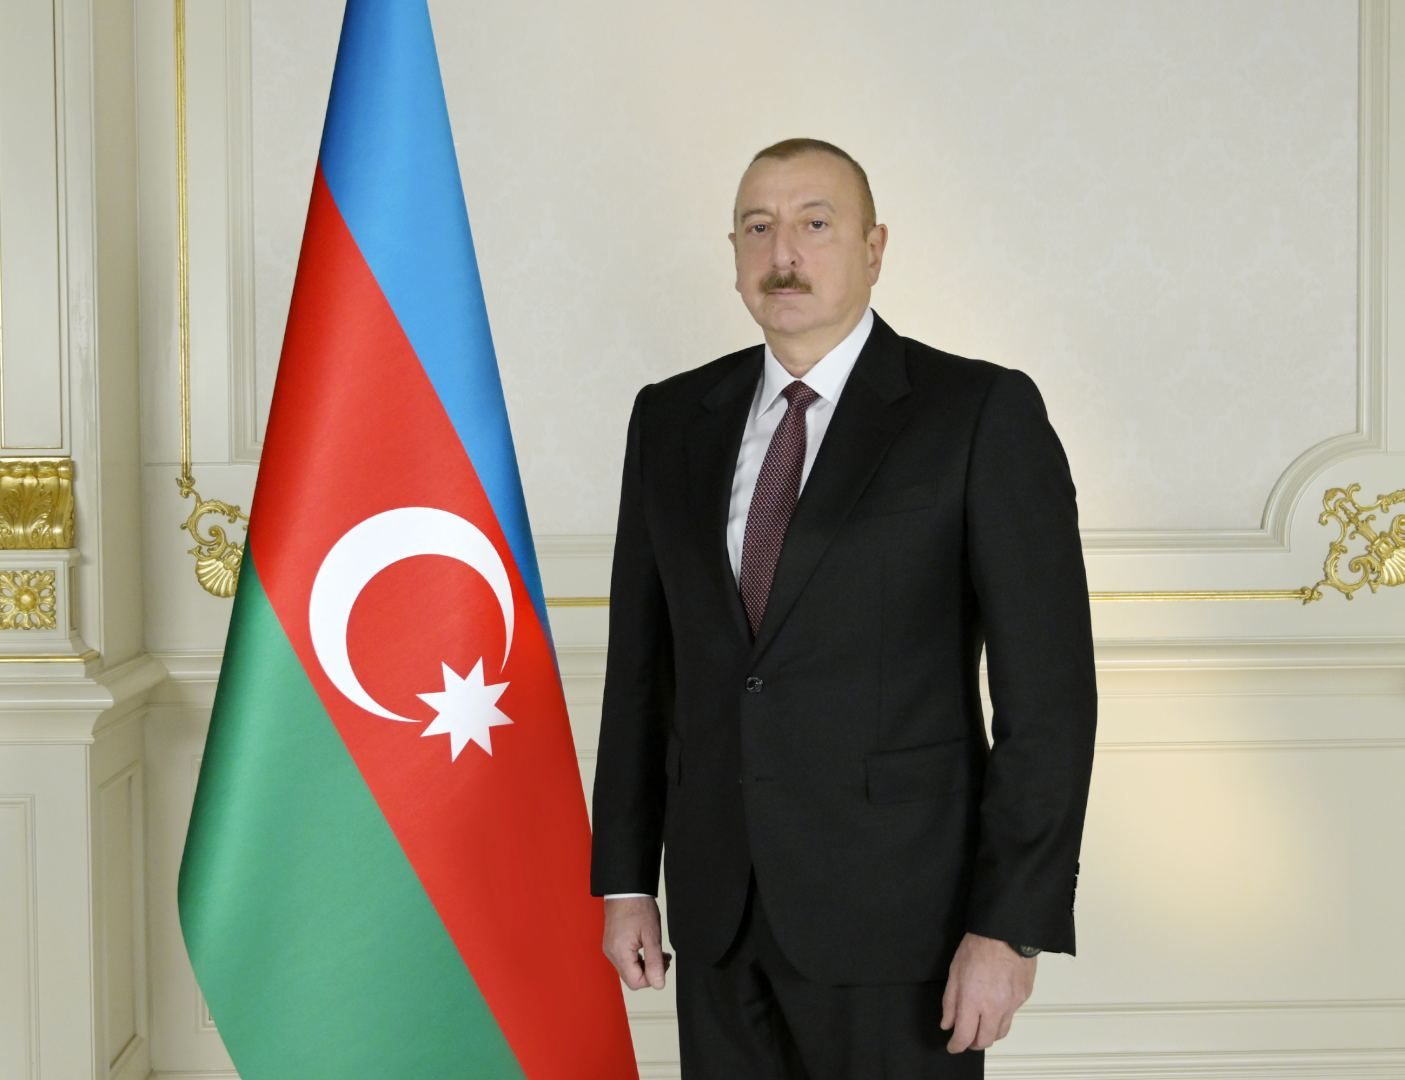 President Ilham Aliyev makes post on Independence Day [PHOTO]